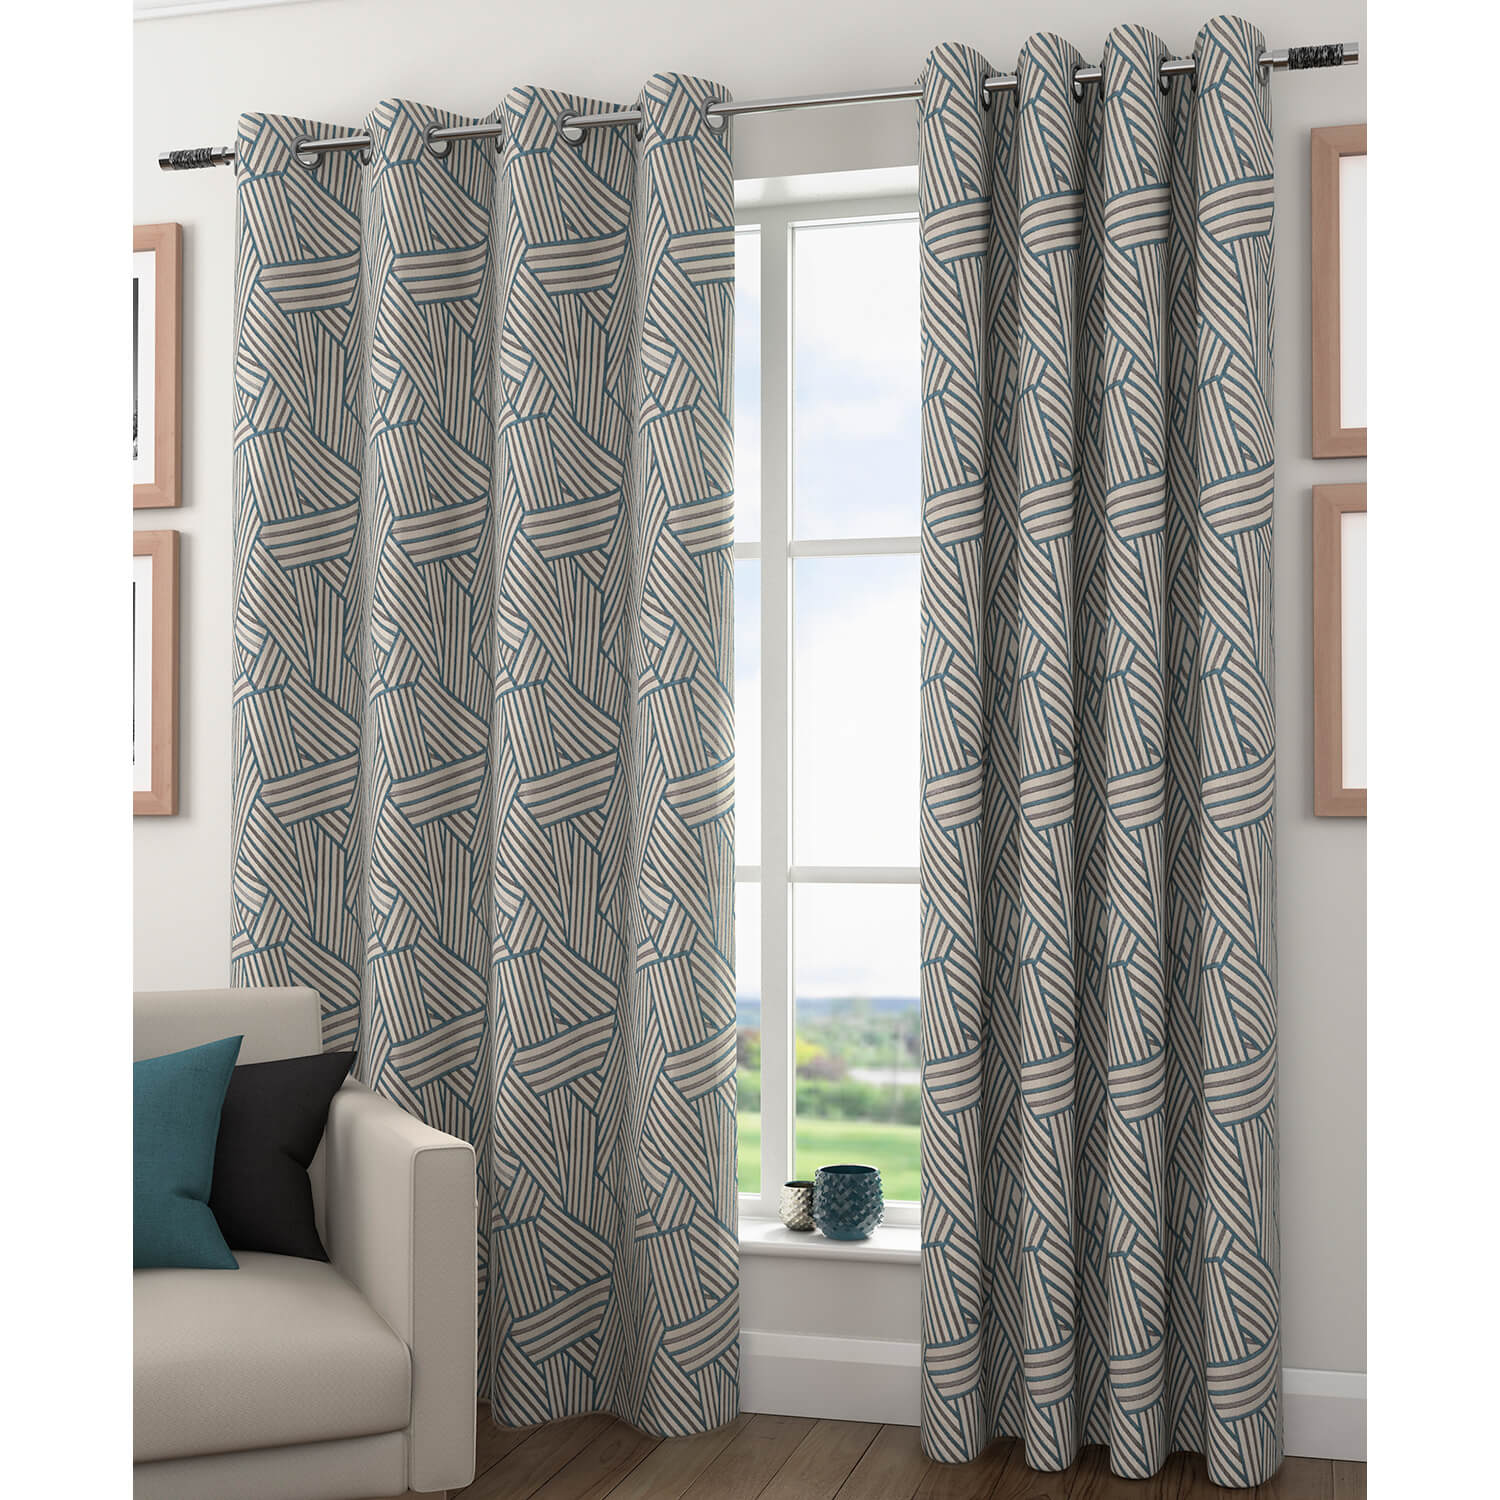 The Home Spectre Interlined Readymade Curtains - Teal 1 Shaws Department Stores